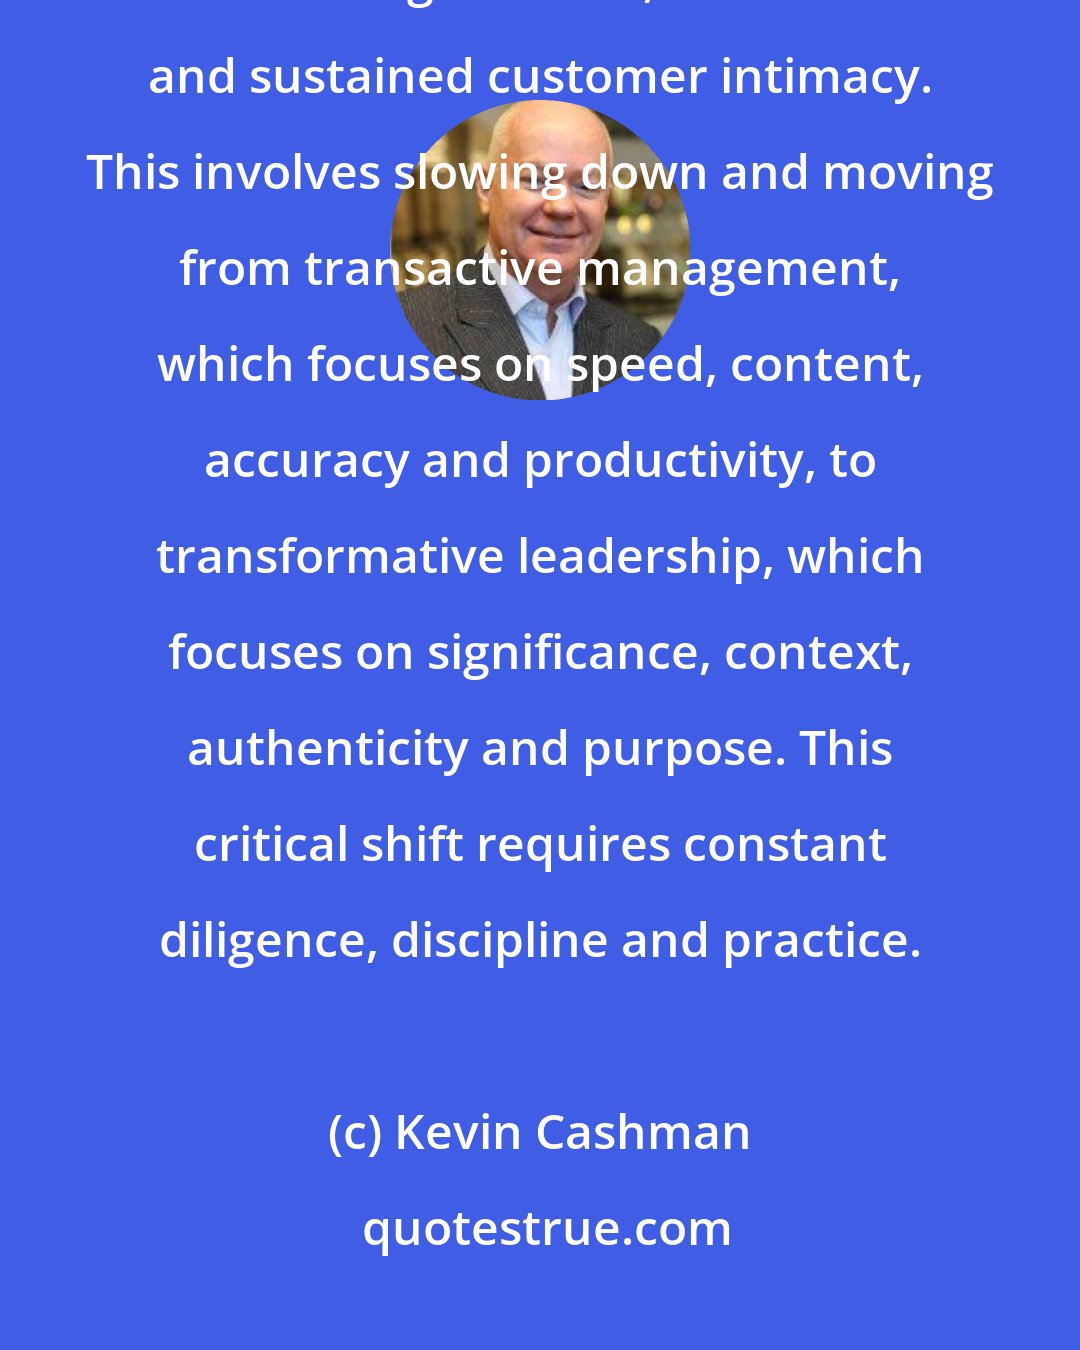 Kevin Cashman: I balance my natural drive for speed and impact with a counterbalancing drive for significance, innovation and sustained customer intimacy. This involves slowing down and moving from transactive management, which focuses on speed, content, accuracy and productivity, to transformative leadership, which focuses on significance, context, authenticity and purpose. This critical shift requires constant diligence, discipline and practice.